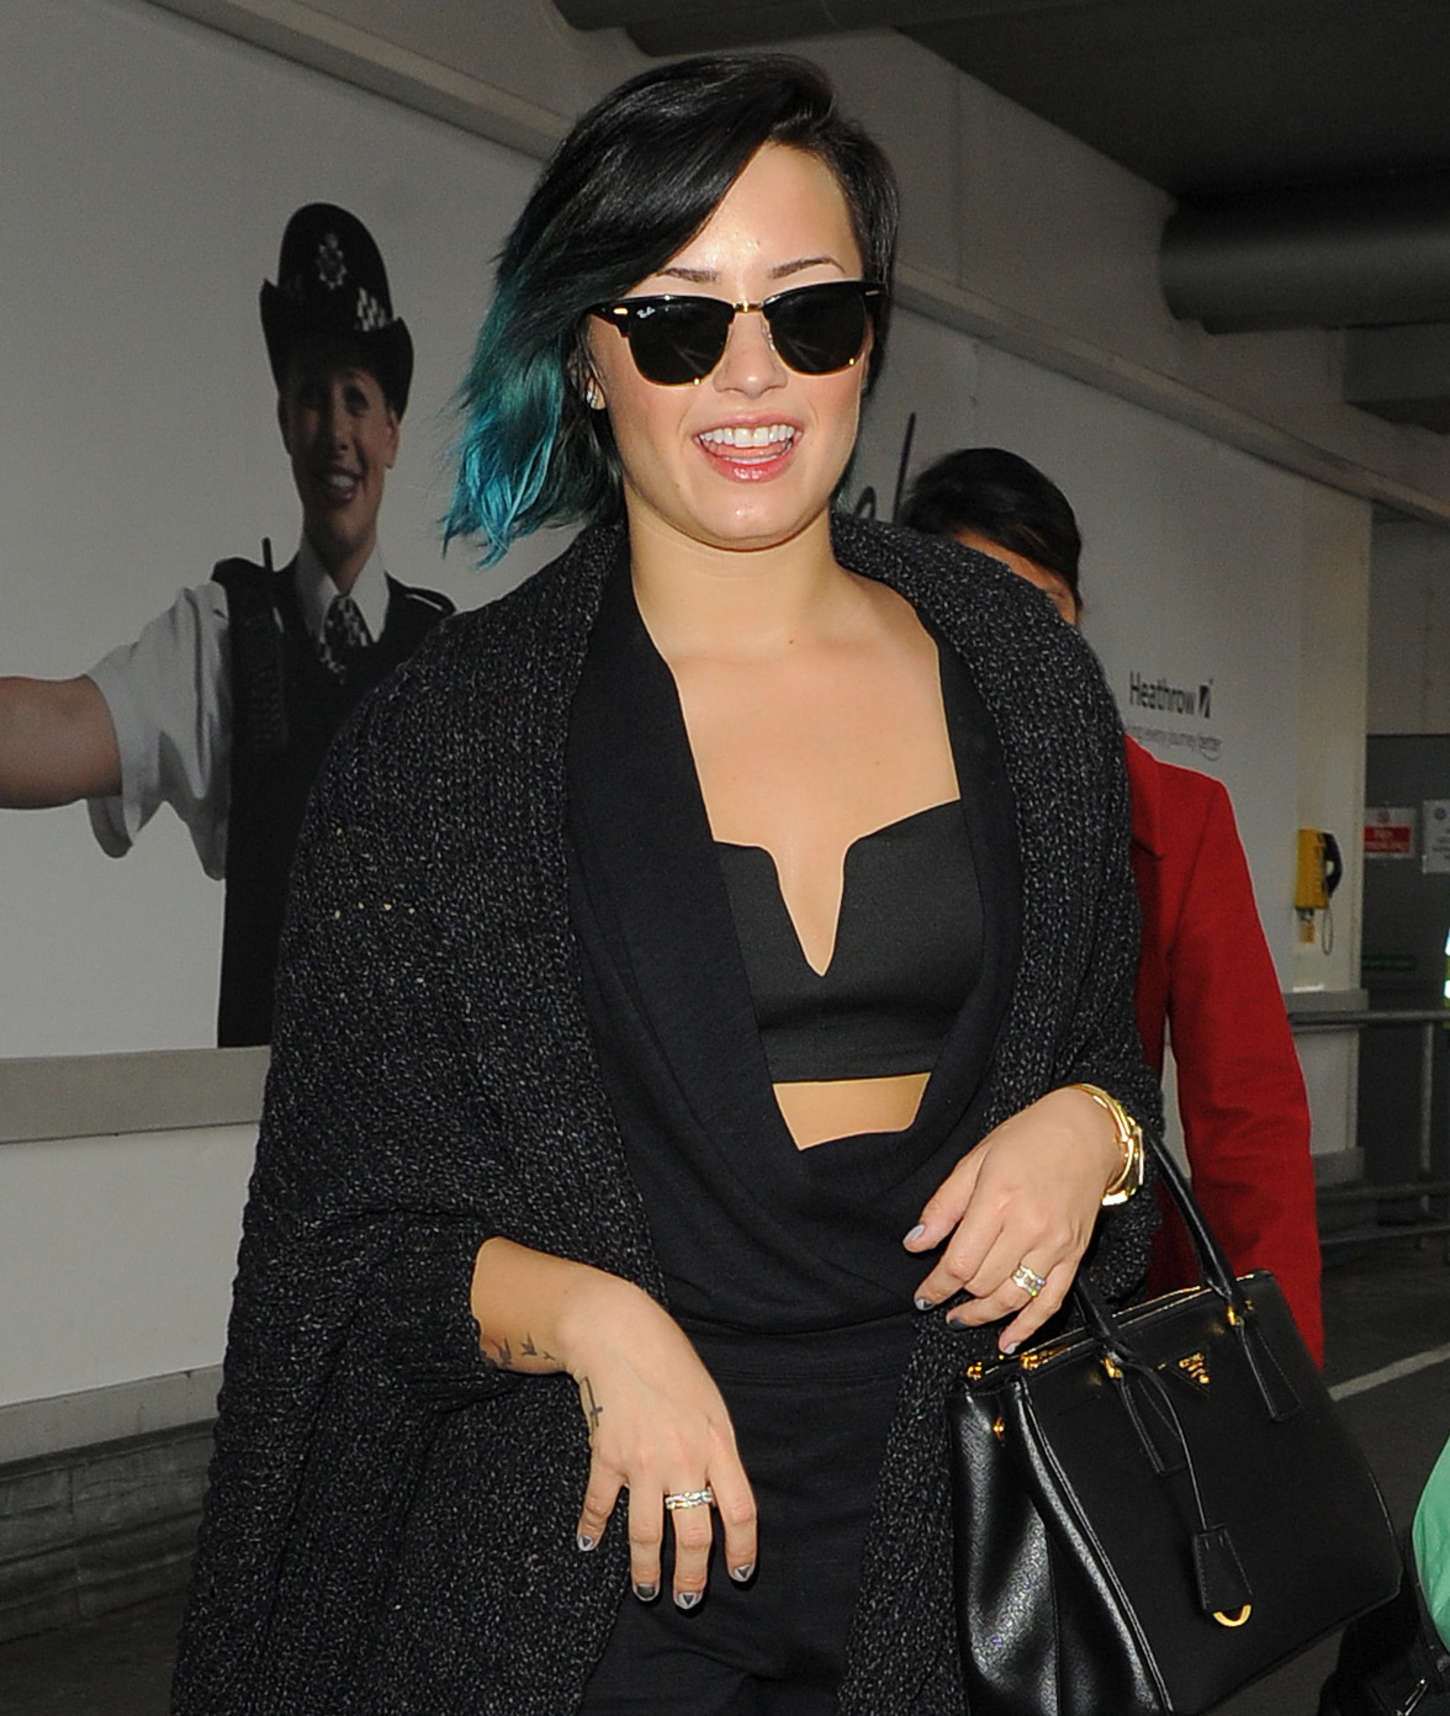 Demi Lovato - Arriving at Heathrow airport in London